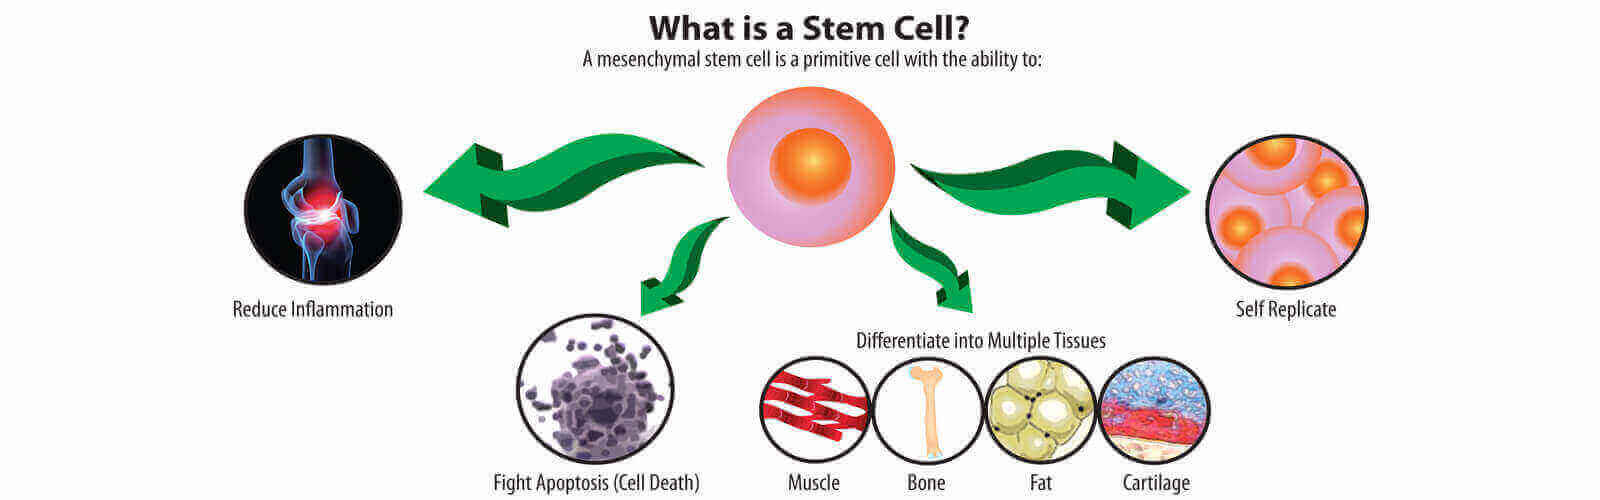 Stem Cell Treatment in Canada